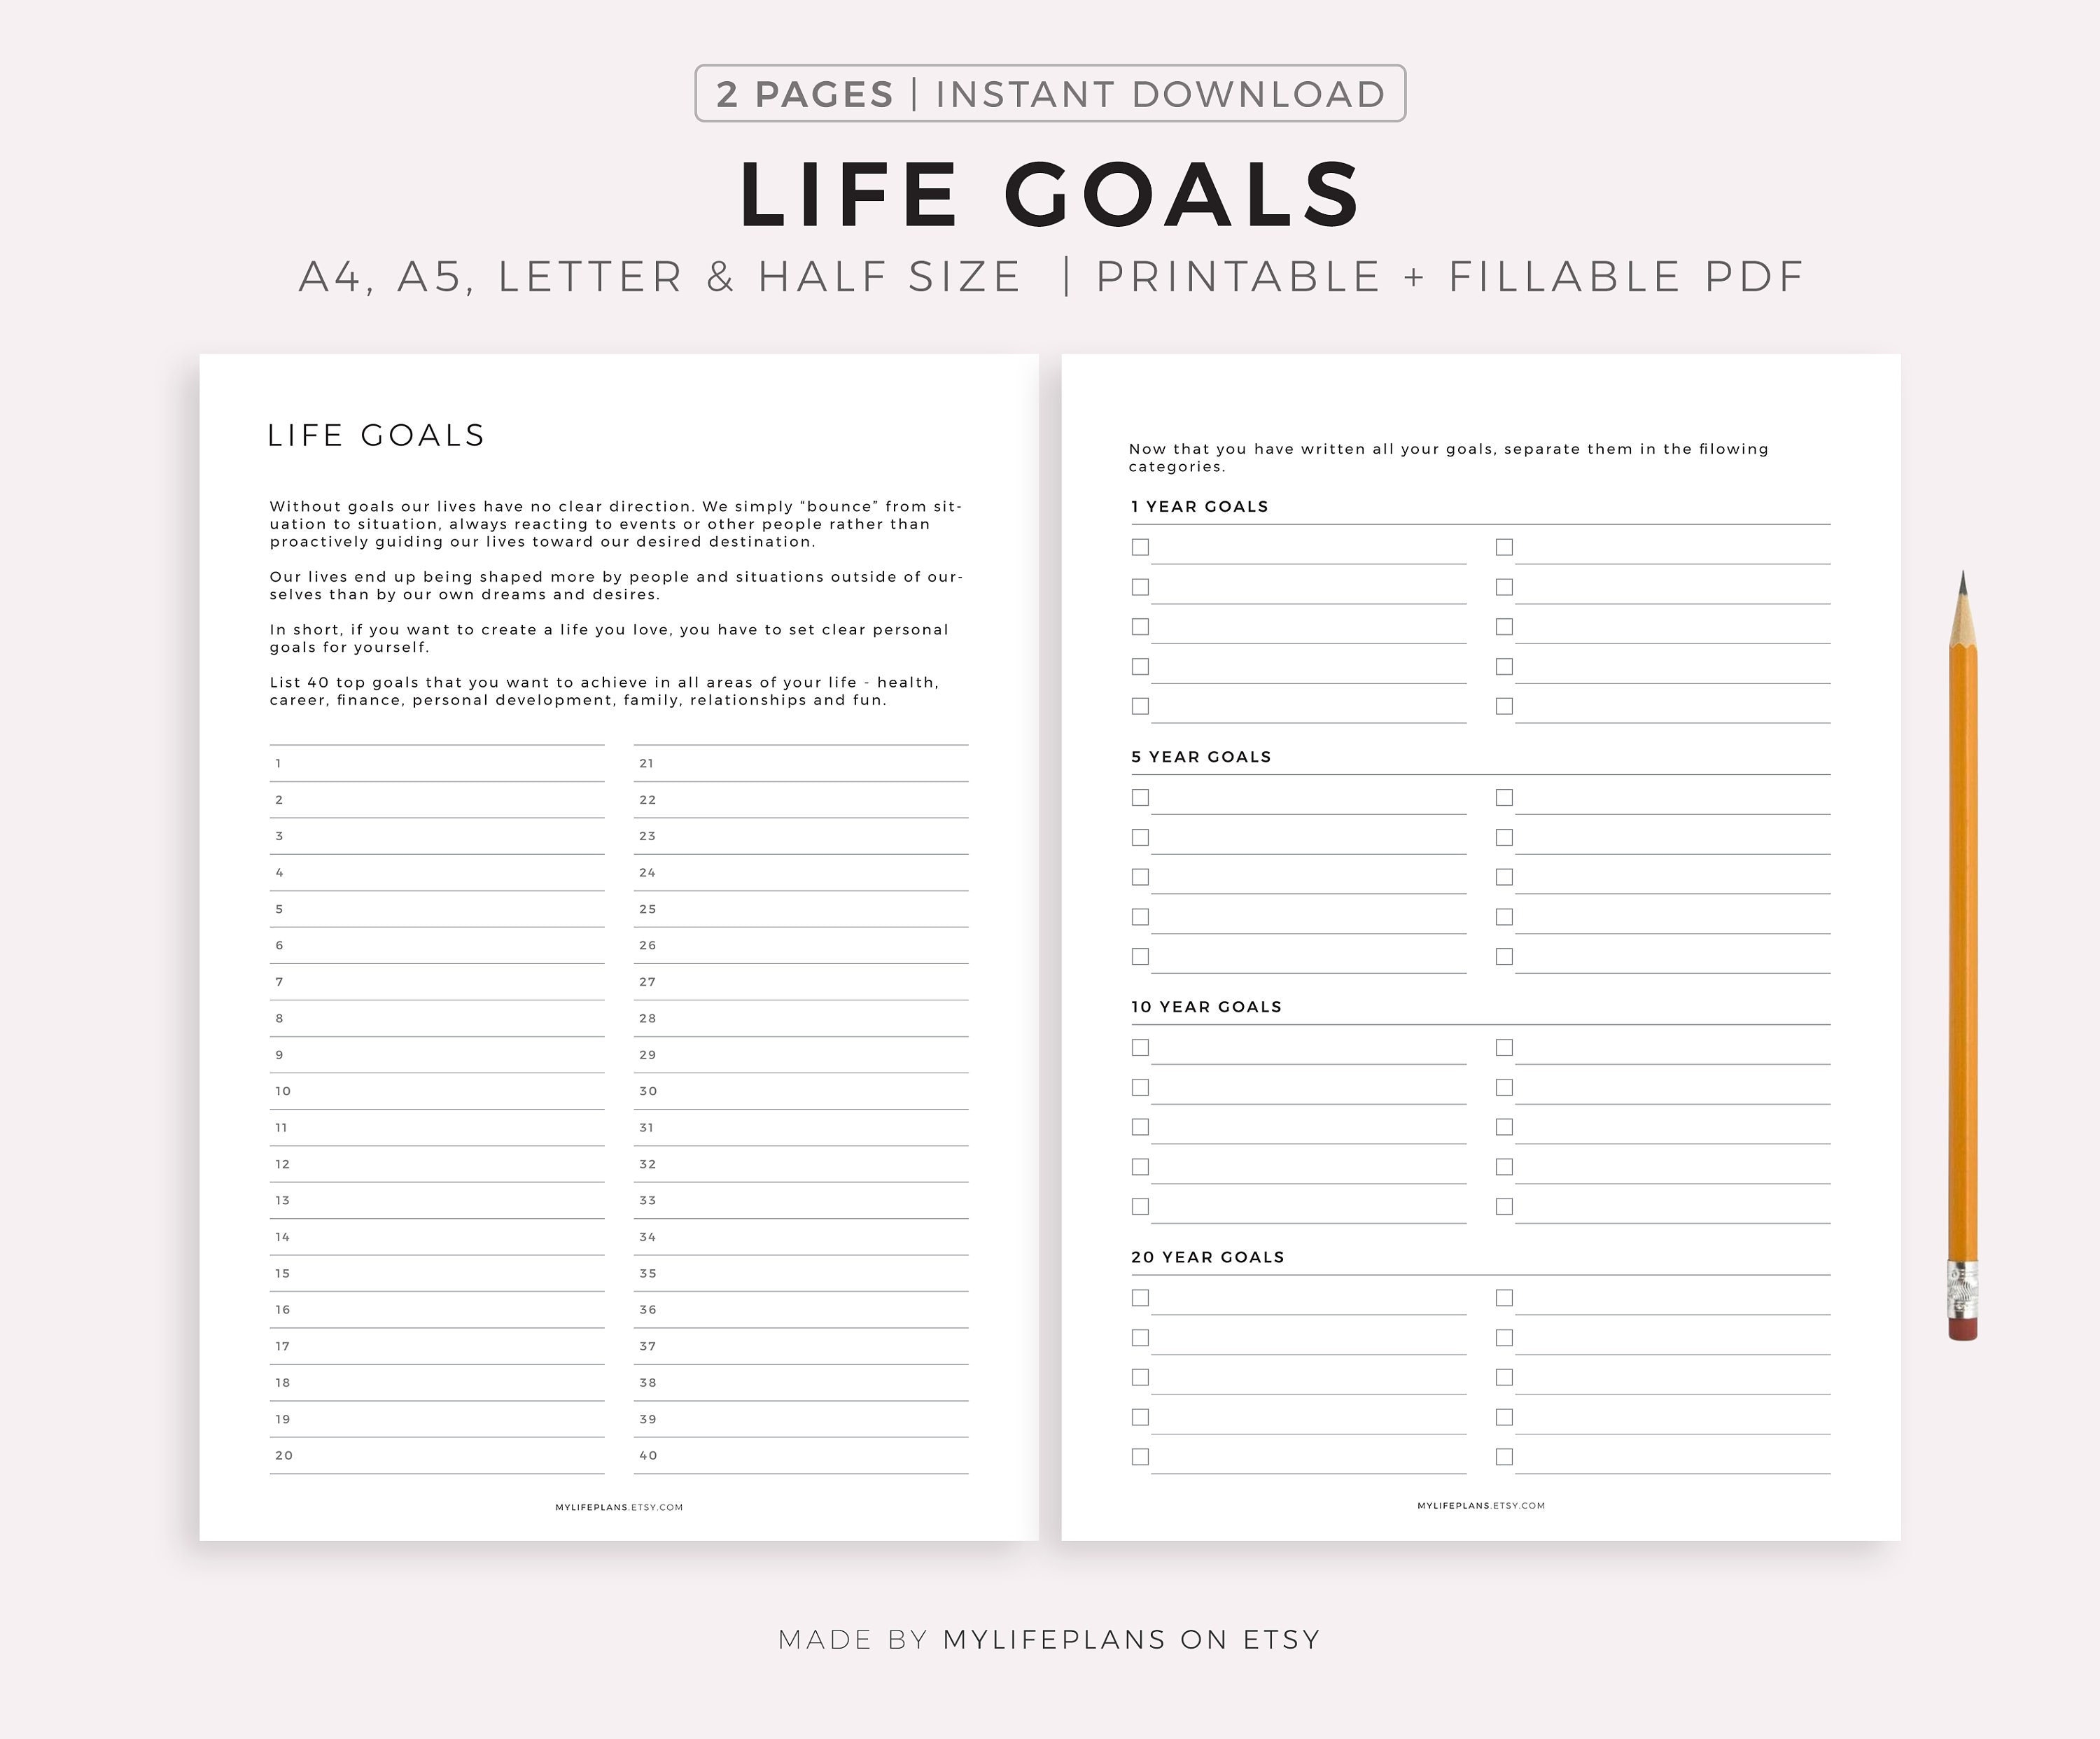 Life Goals Planner, Goal Setting, Life Vision Planner, My Future, Dream Life,  A4/a5/letter/half Size, Instant Download PDF 